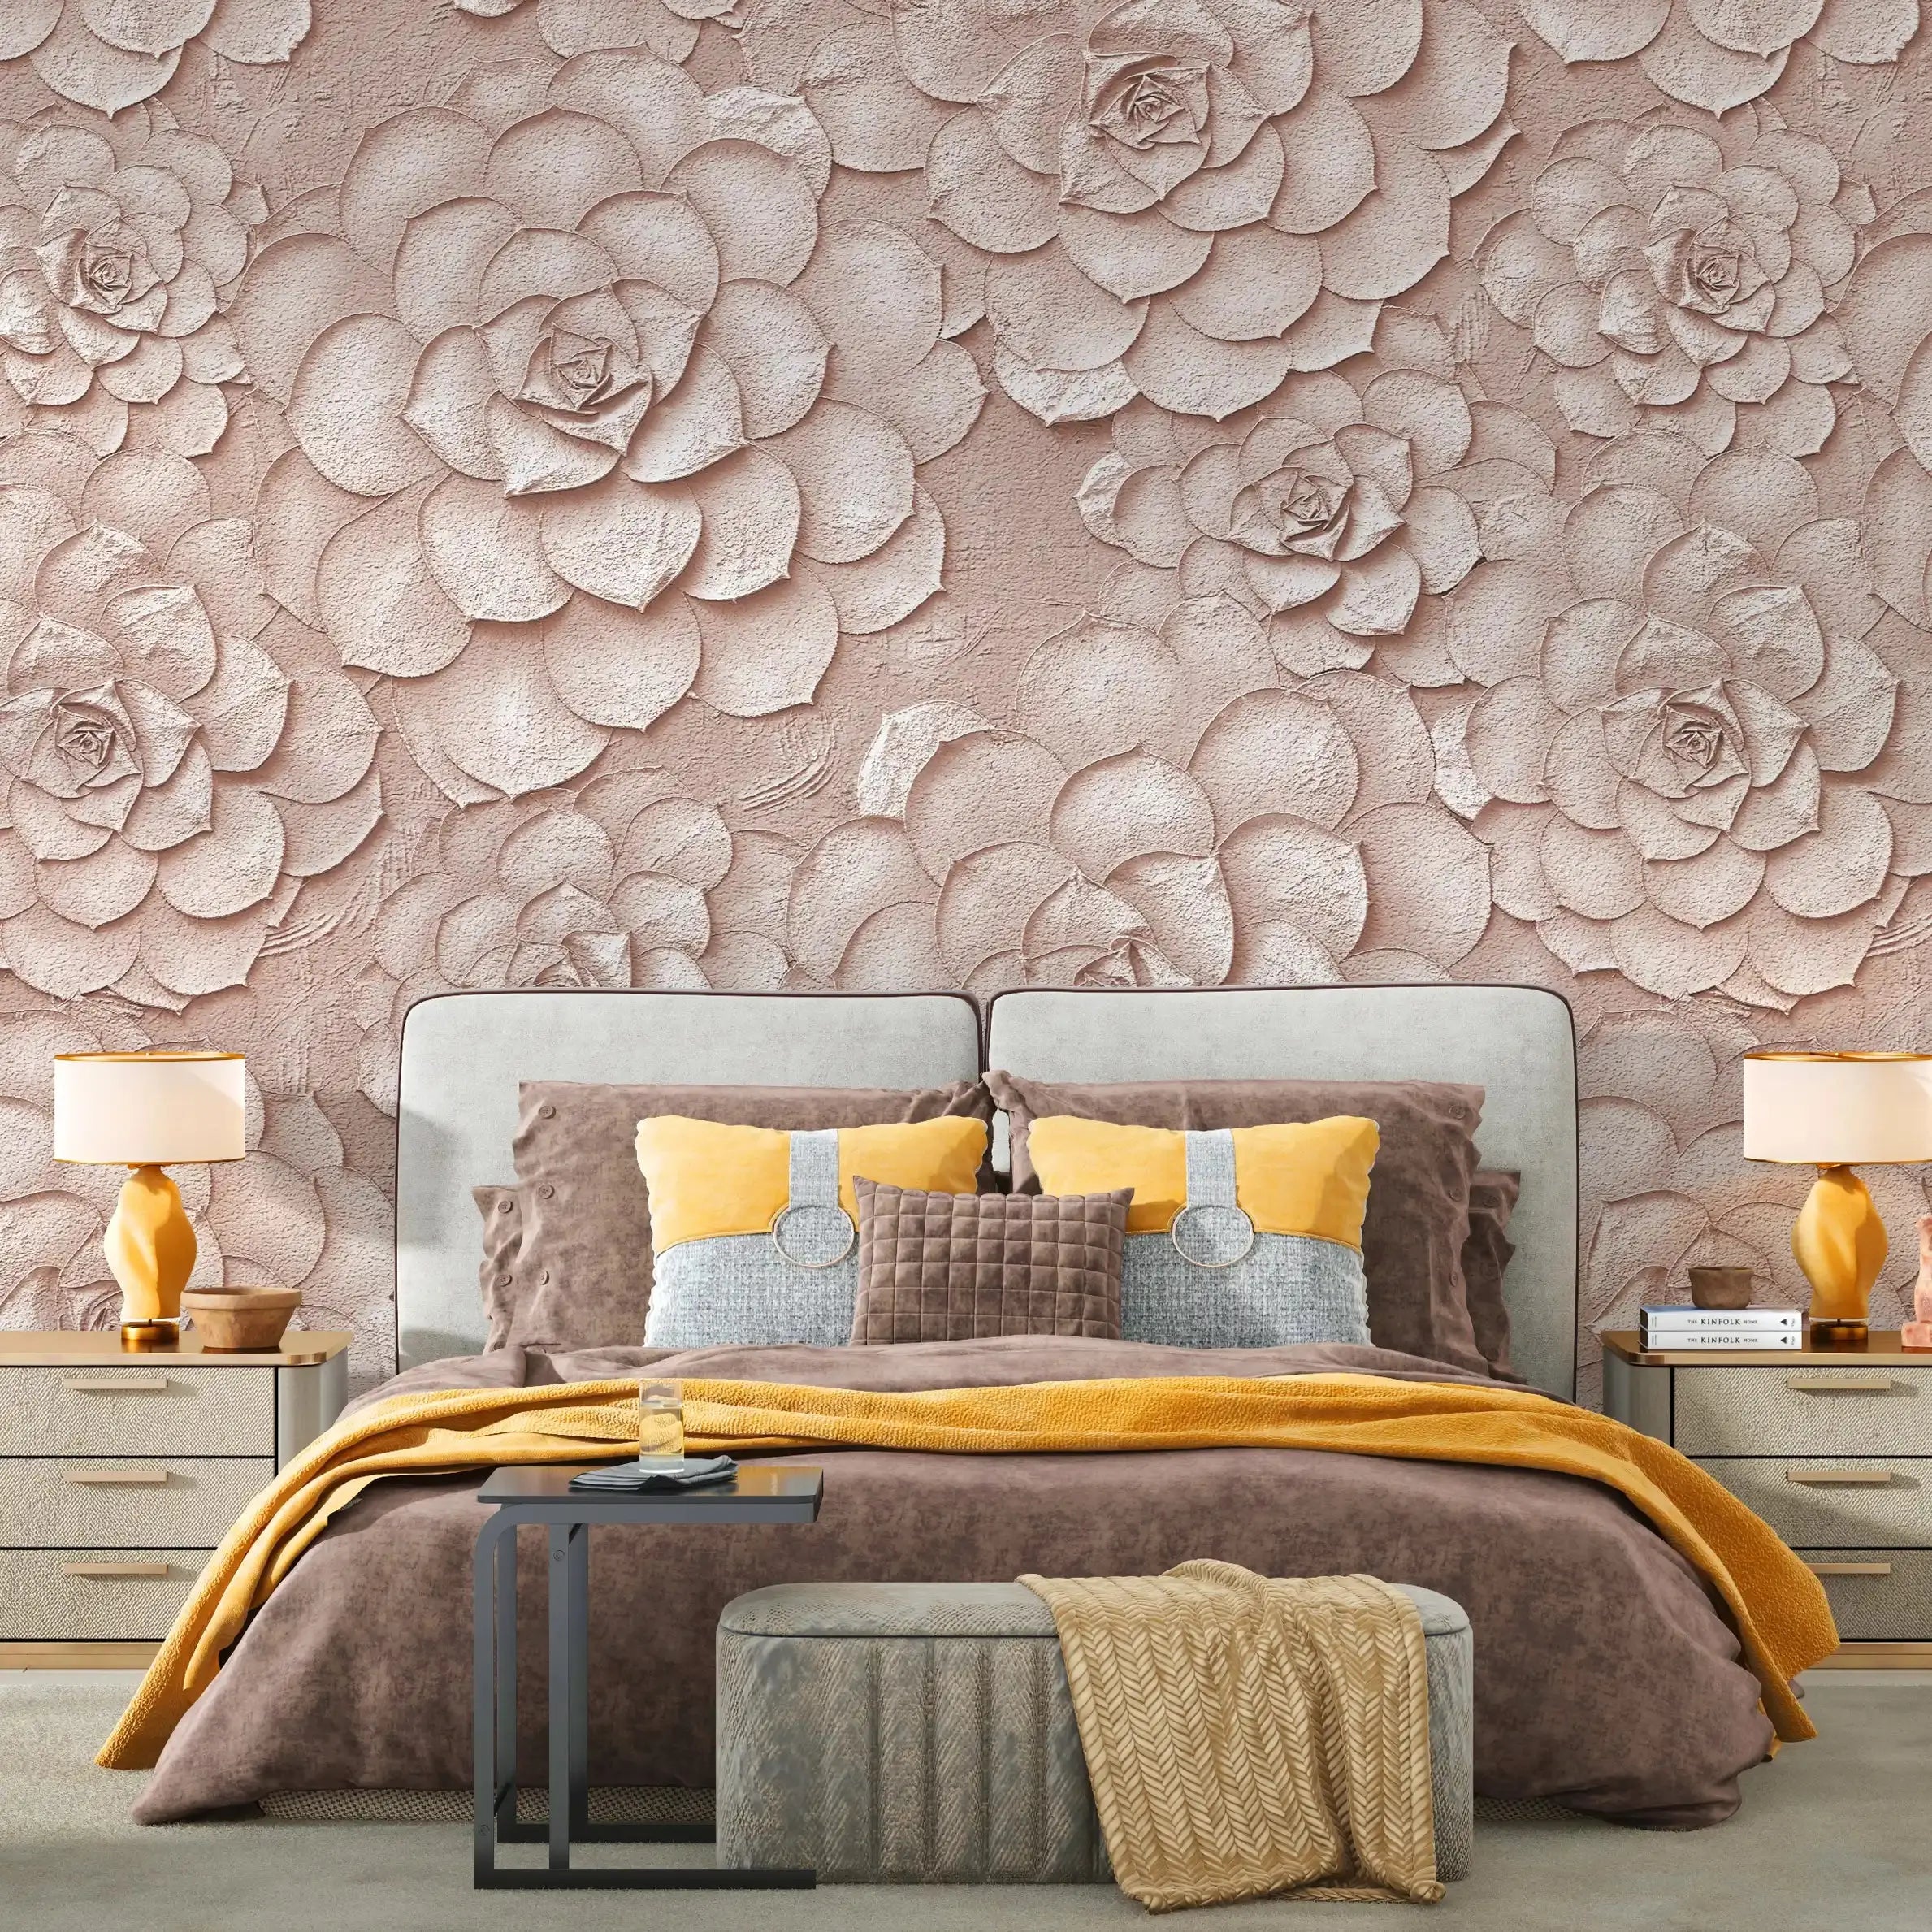 3012-D / Peel and Stick Wallpaper: Orange Rose and White Floral, Easy Install, Self Adhesive Wall Paper for Any Room - Artevella